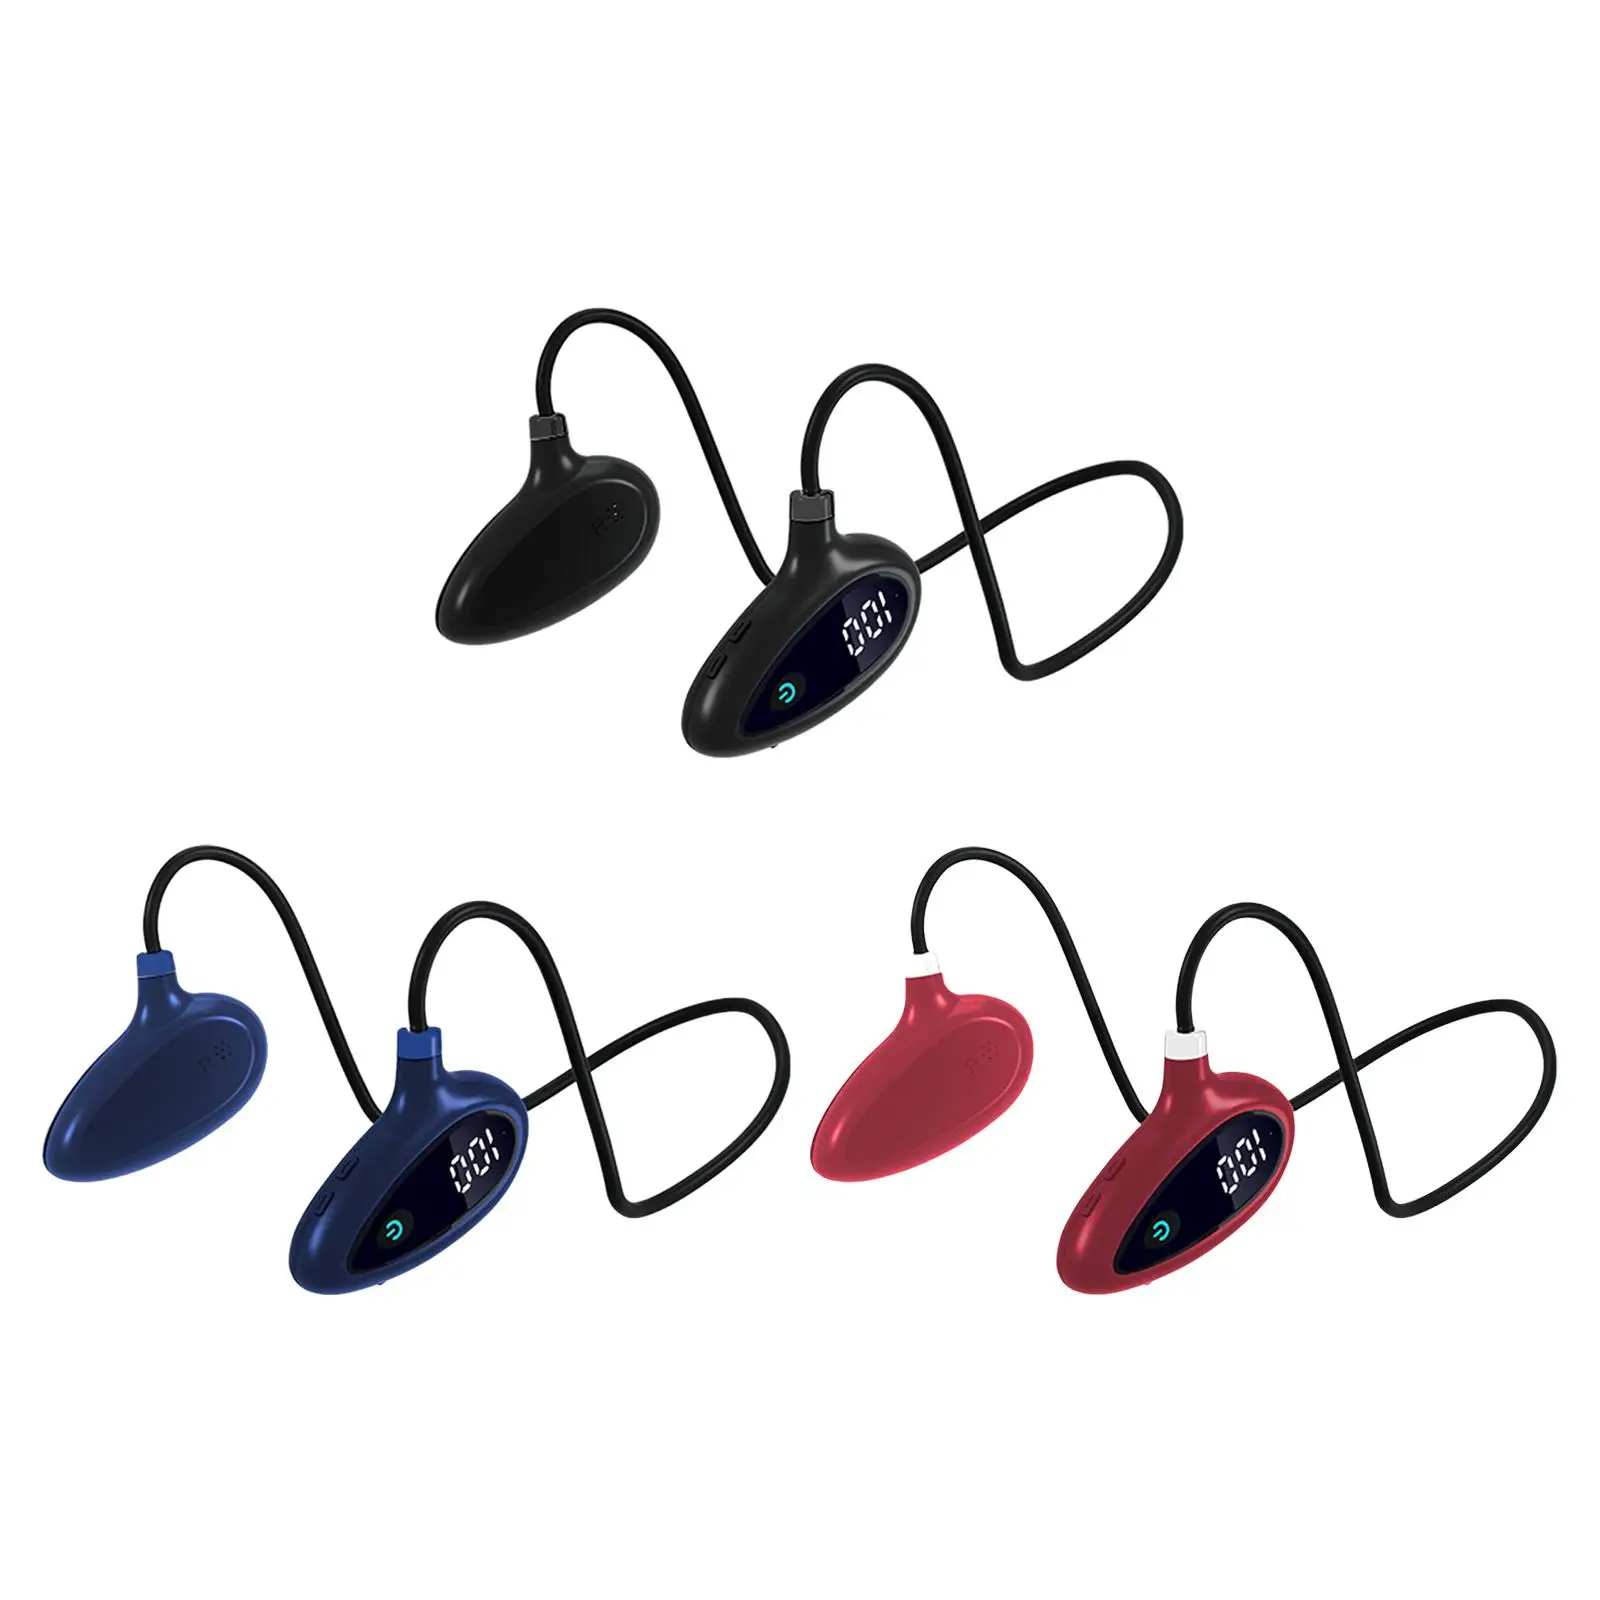 V5.3 Sports Air Conduction Headset Bending Without Deformation Waterproof Earphones for Climbing Yoga Fitness Gym Travel